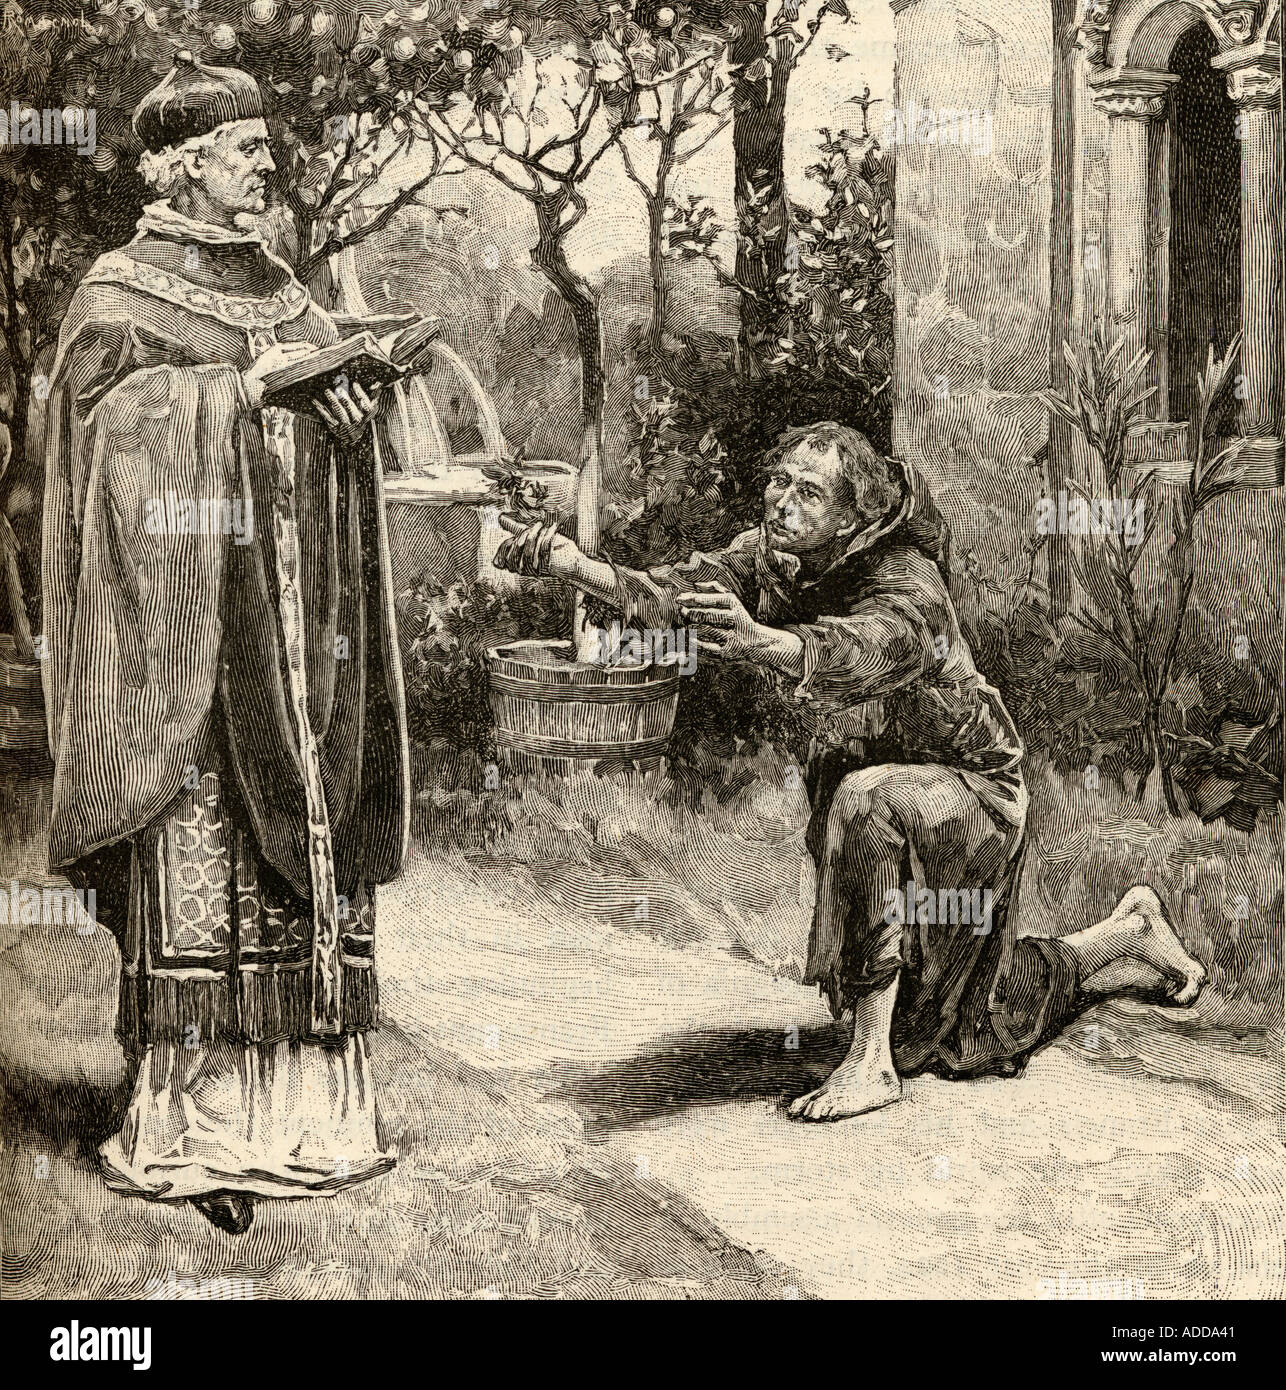 Pope Innocent III, c. 1160-1216 and Saint Francis of Assisi, c.1181 - 1226. Stock Photo